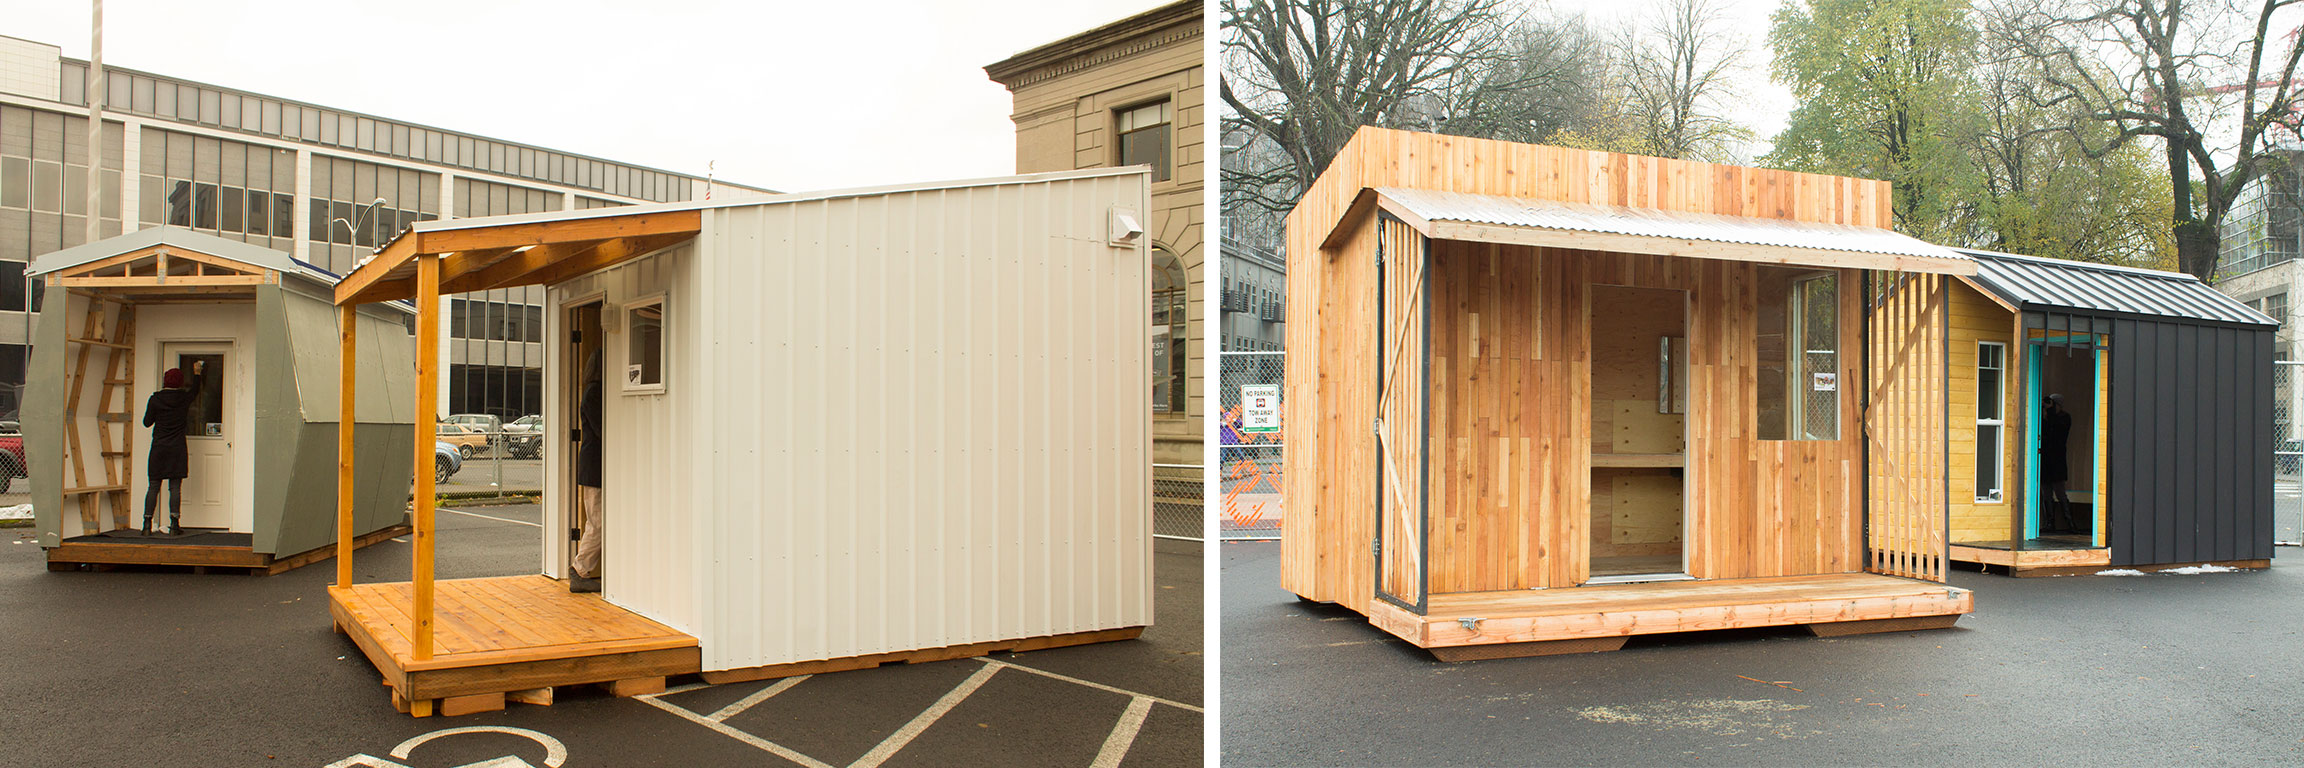 Portland's sleeping pods for the homeless